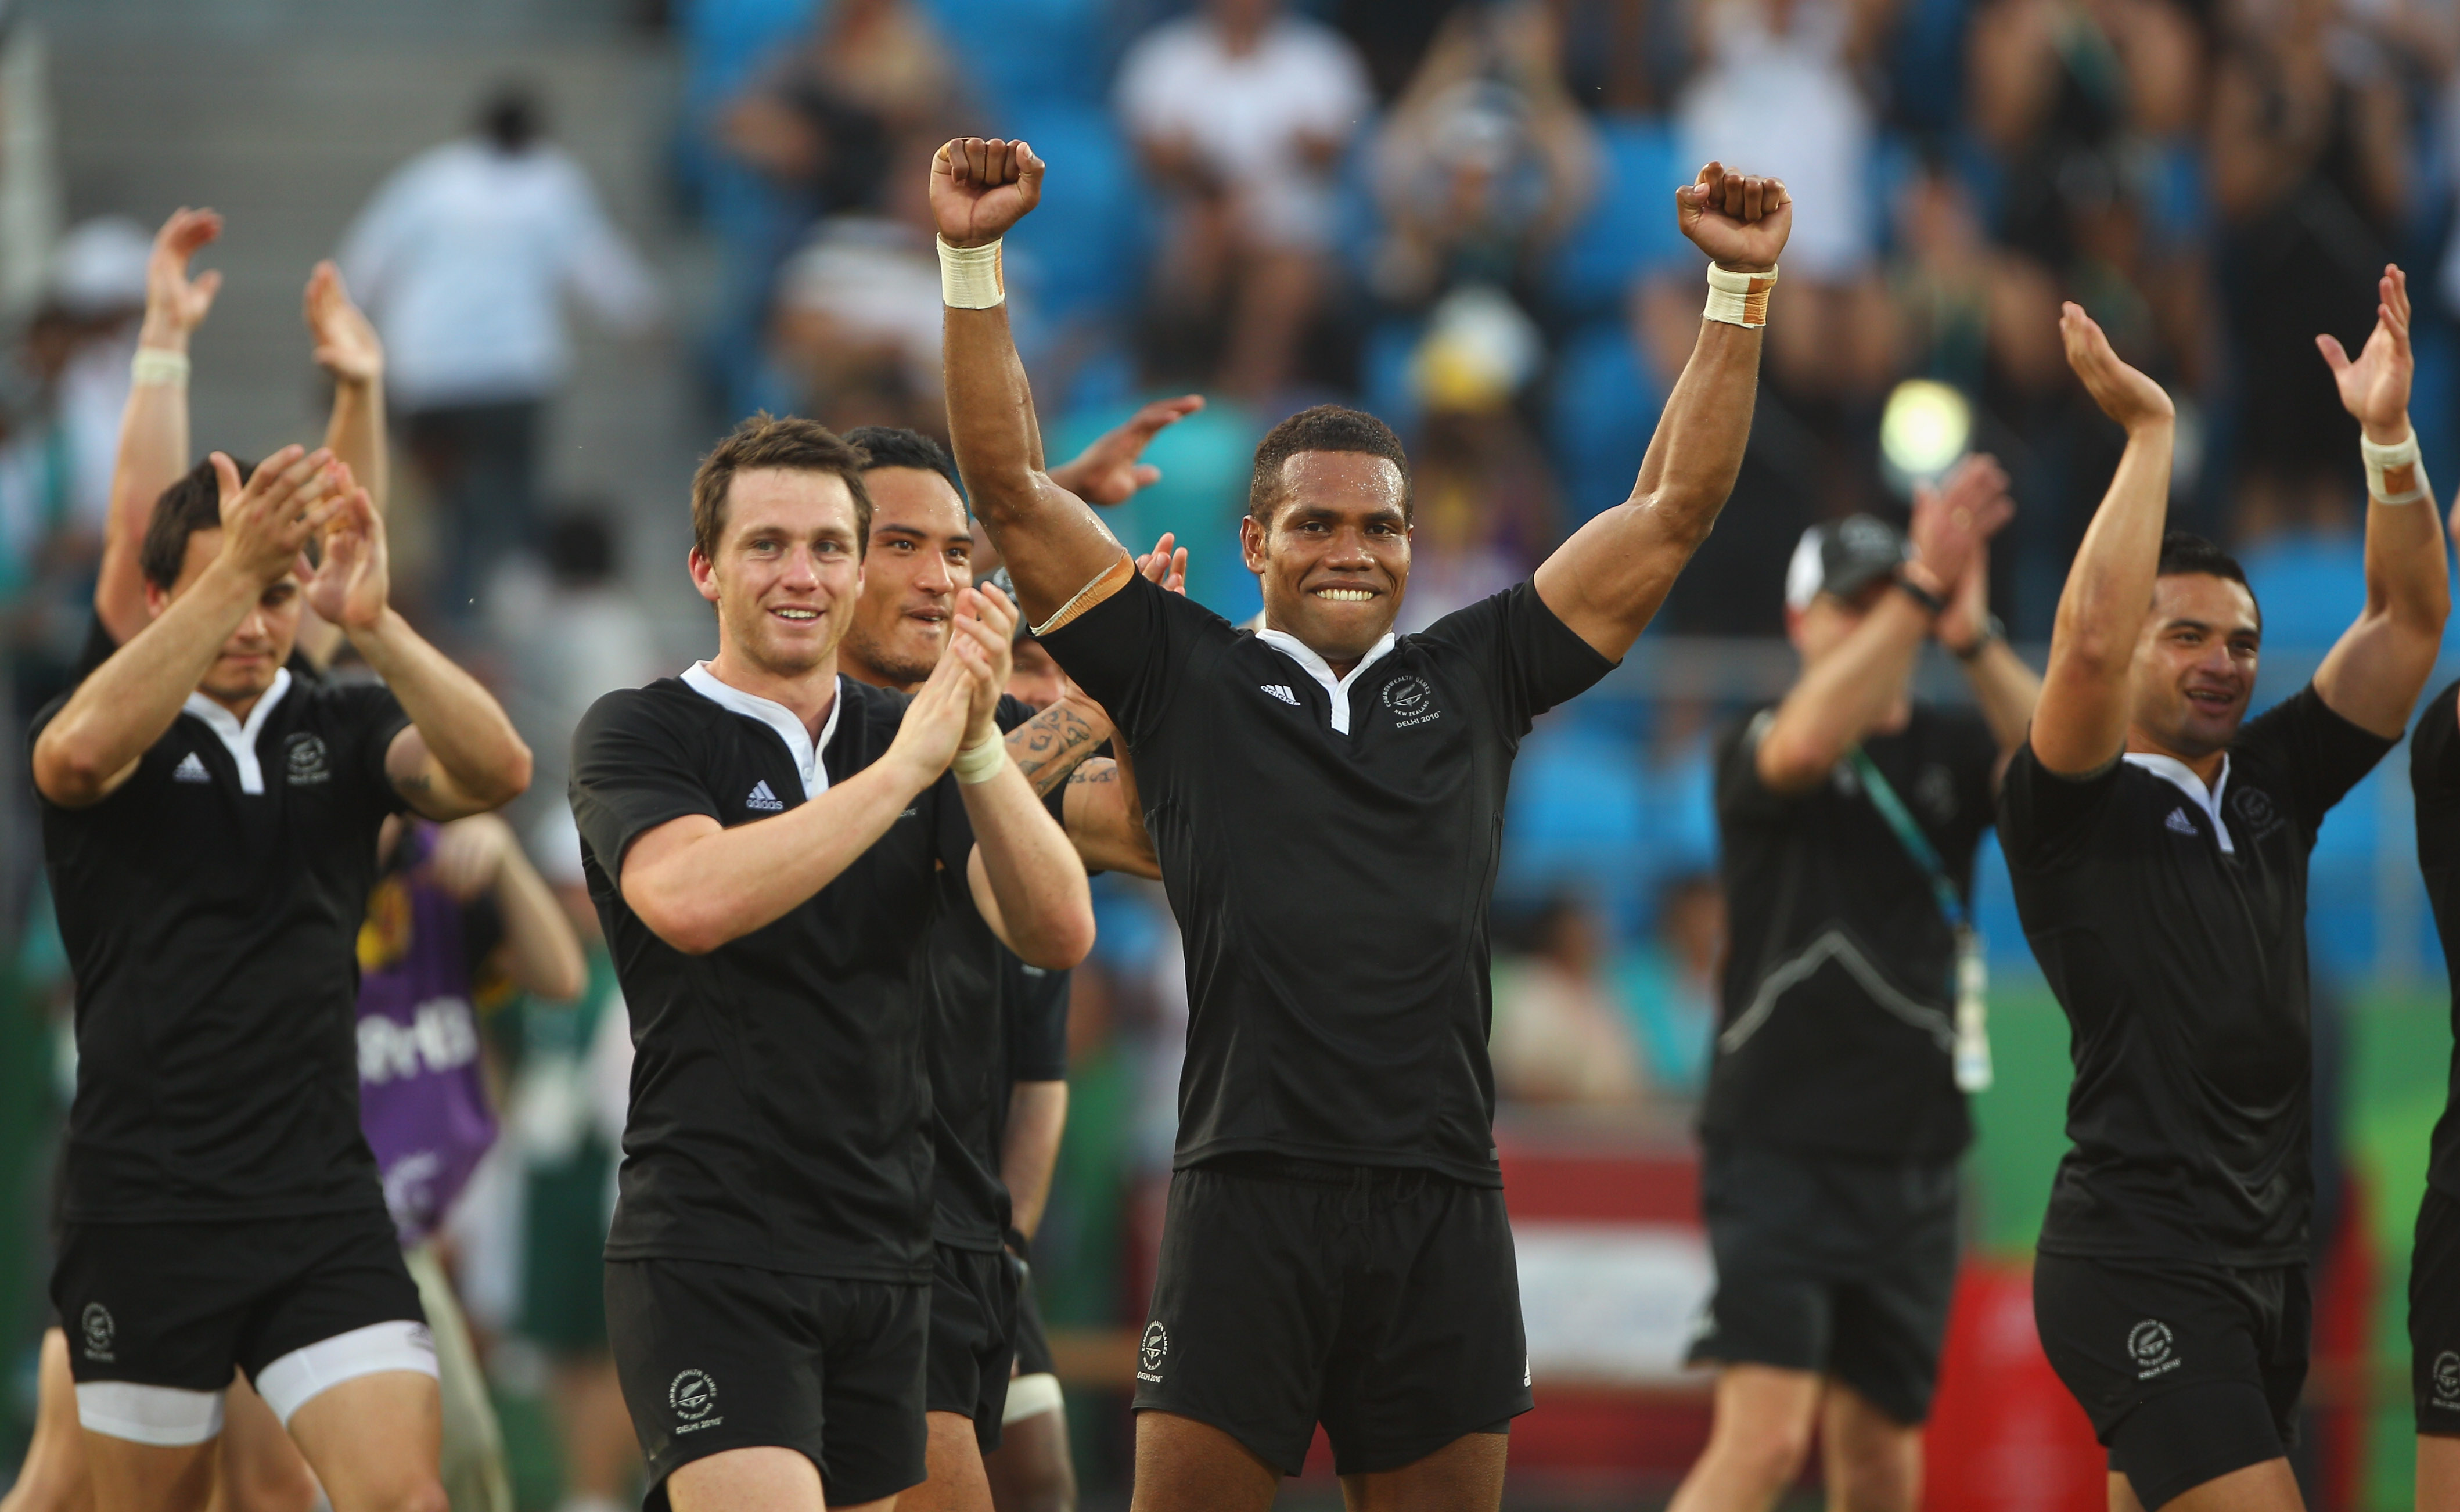 Rugby Sevens Team Named New Zealand Olympic Team